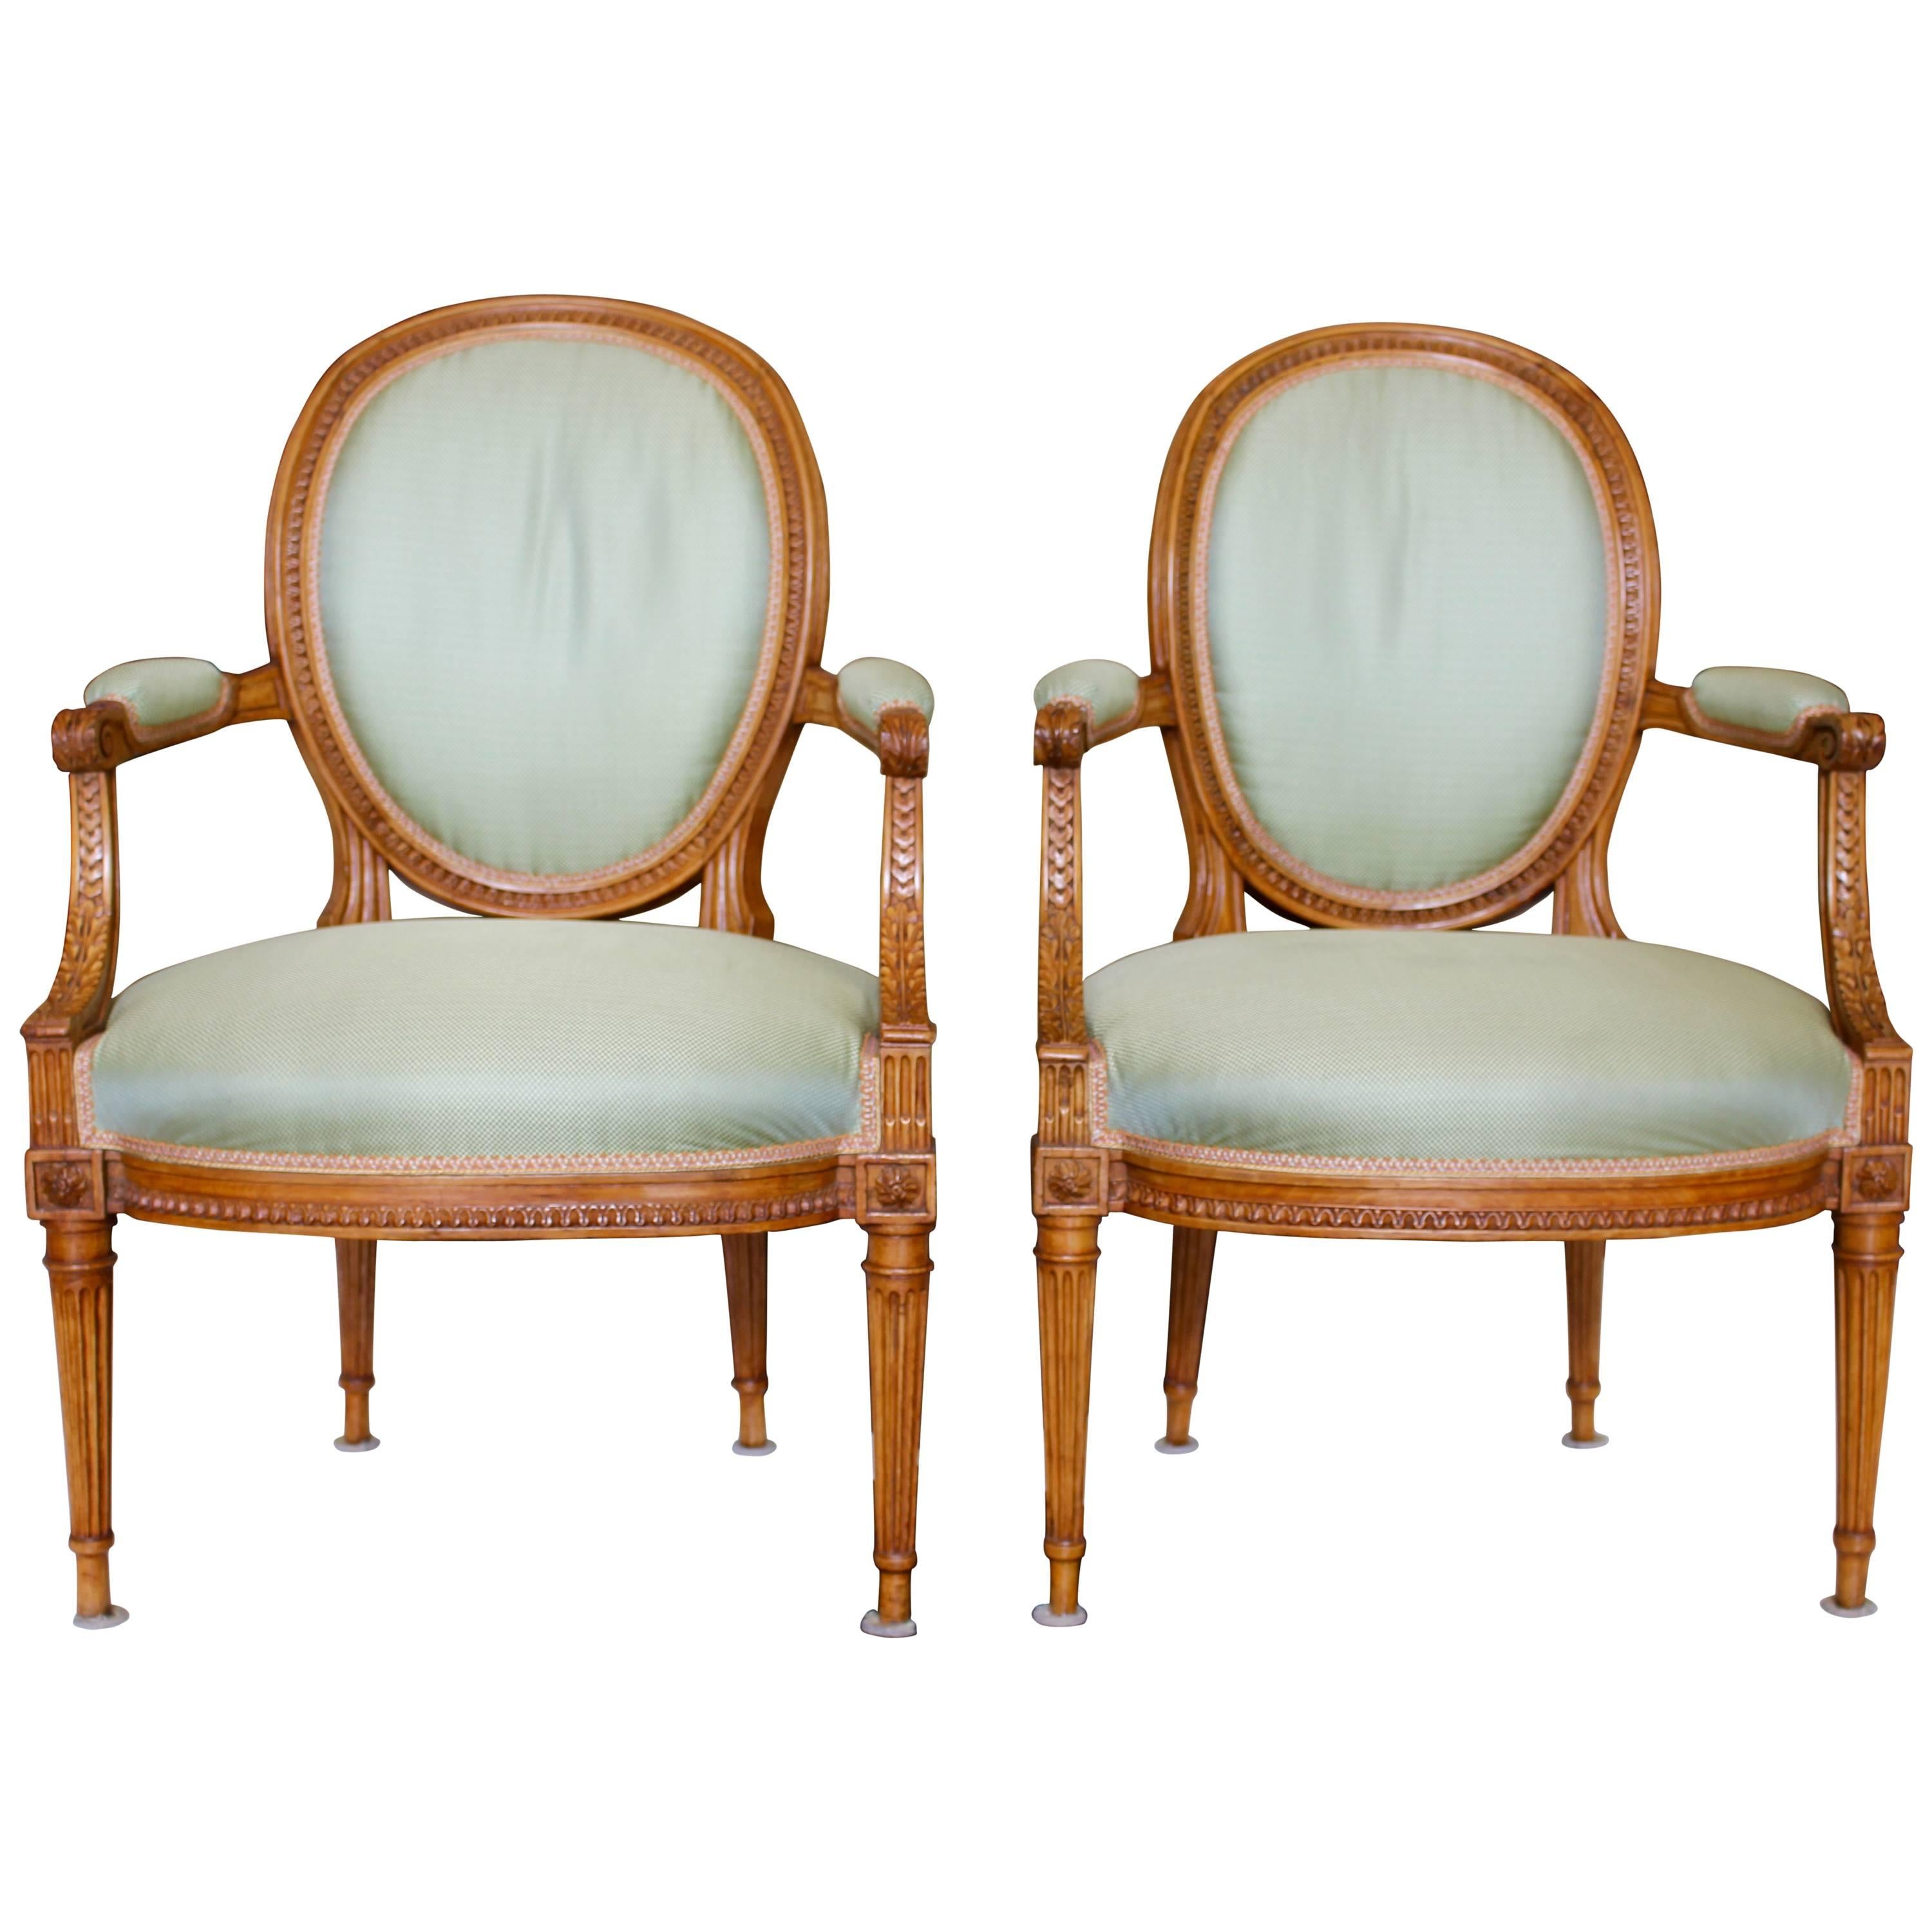 Pair of Louis XVI Style Beechwood Cabriolets Fauteuils with Oval Medallion Backs